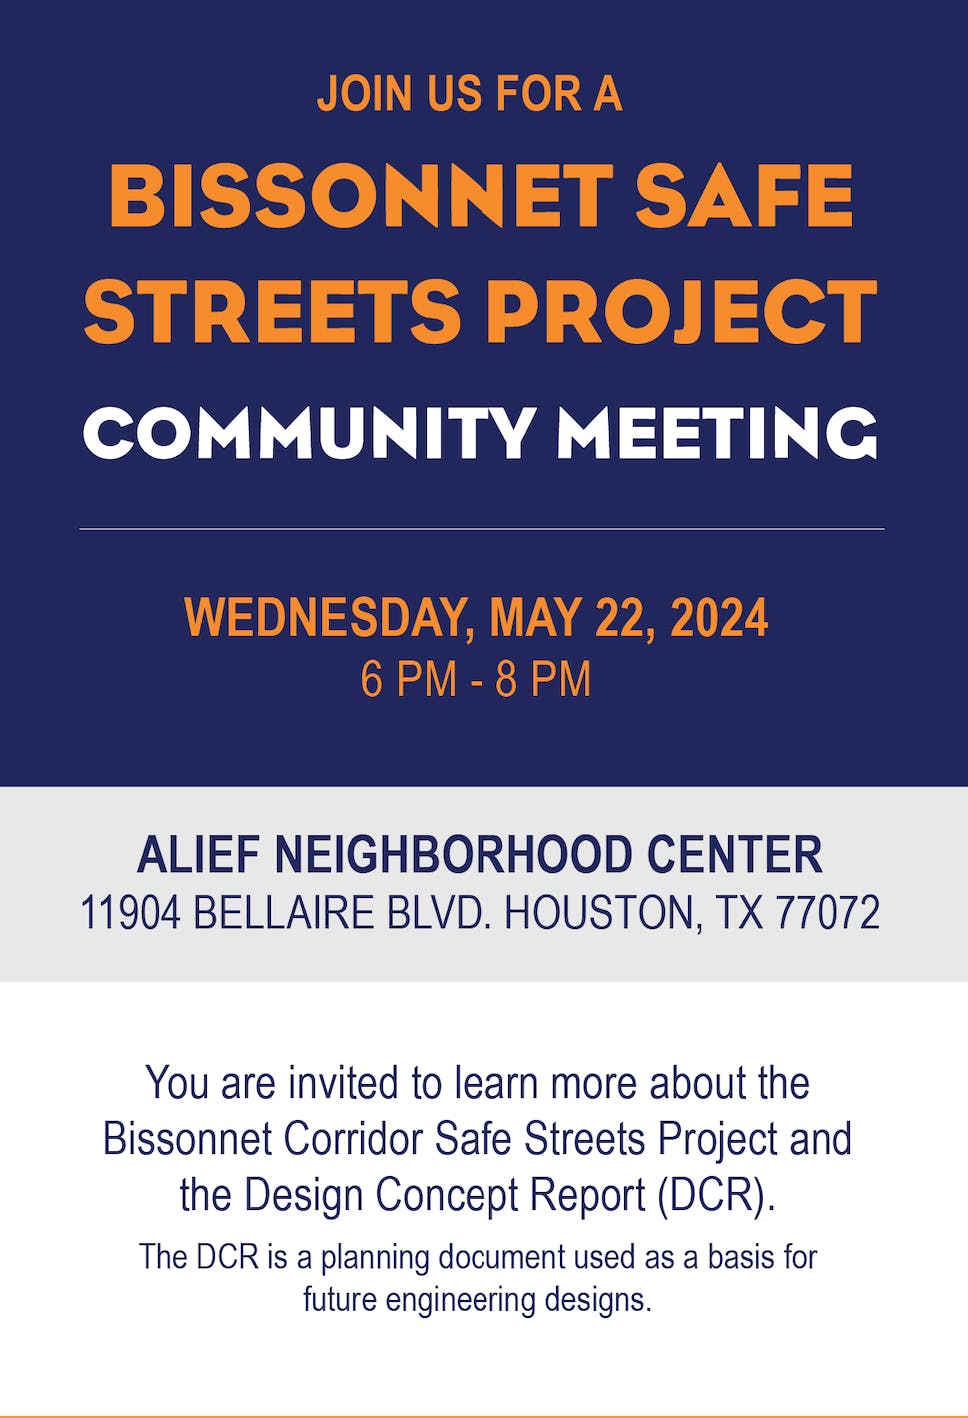 Bissonnet Safe Streets Project Community Meeting